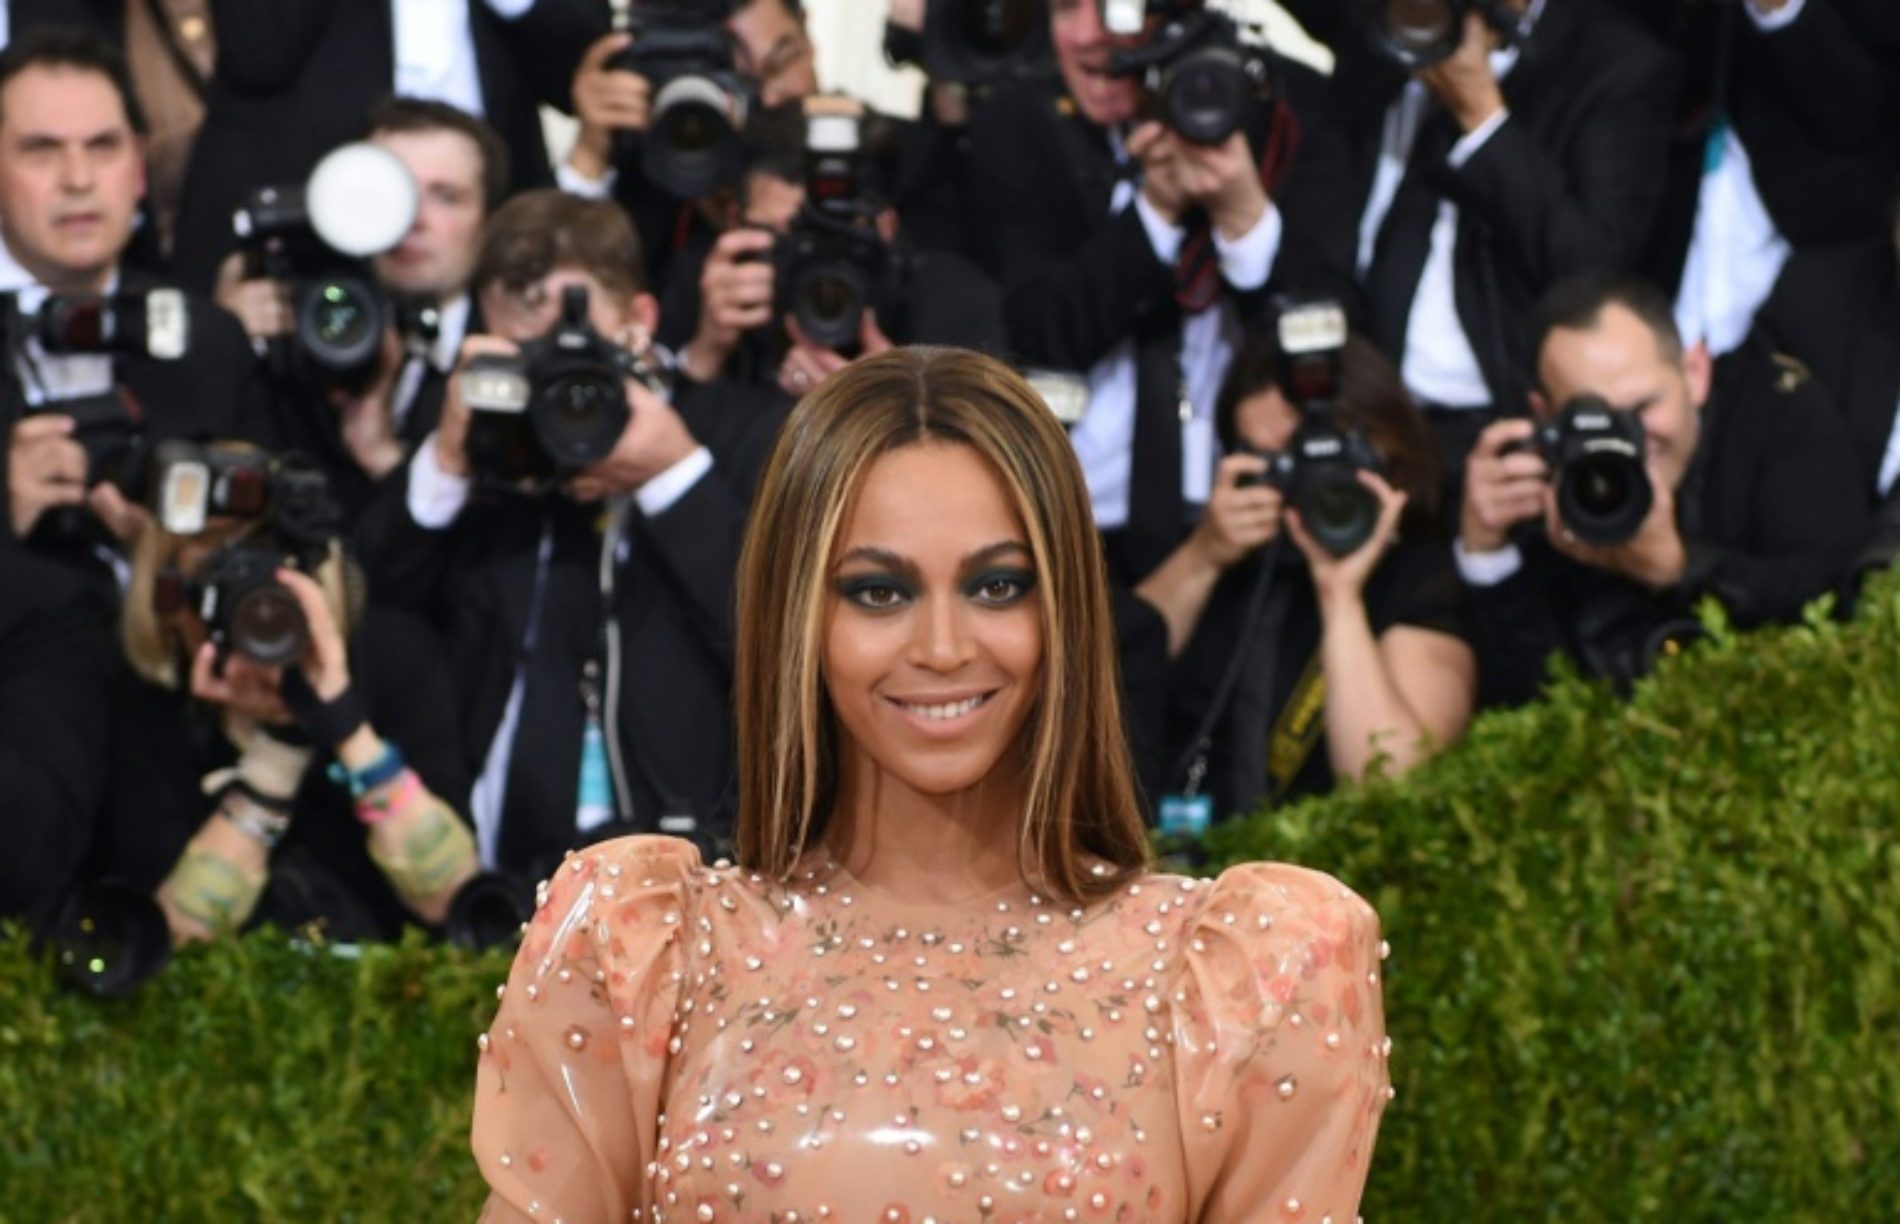 Beyoncé is Music’s Highest Paid Woman According to Forbes